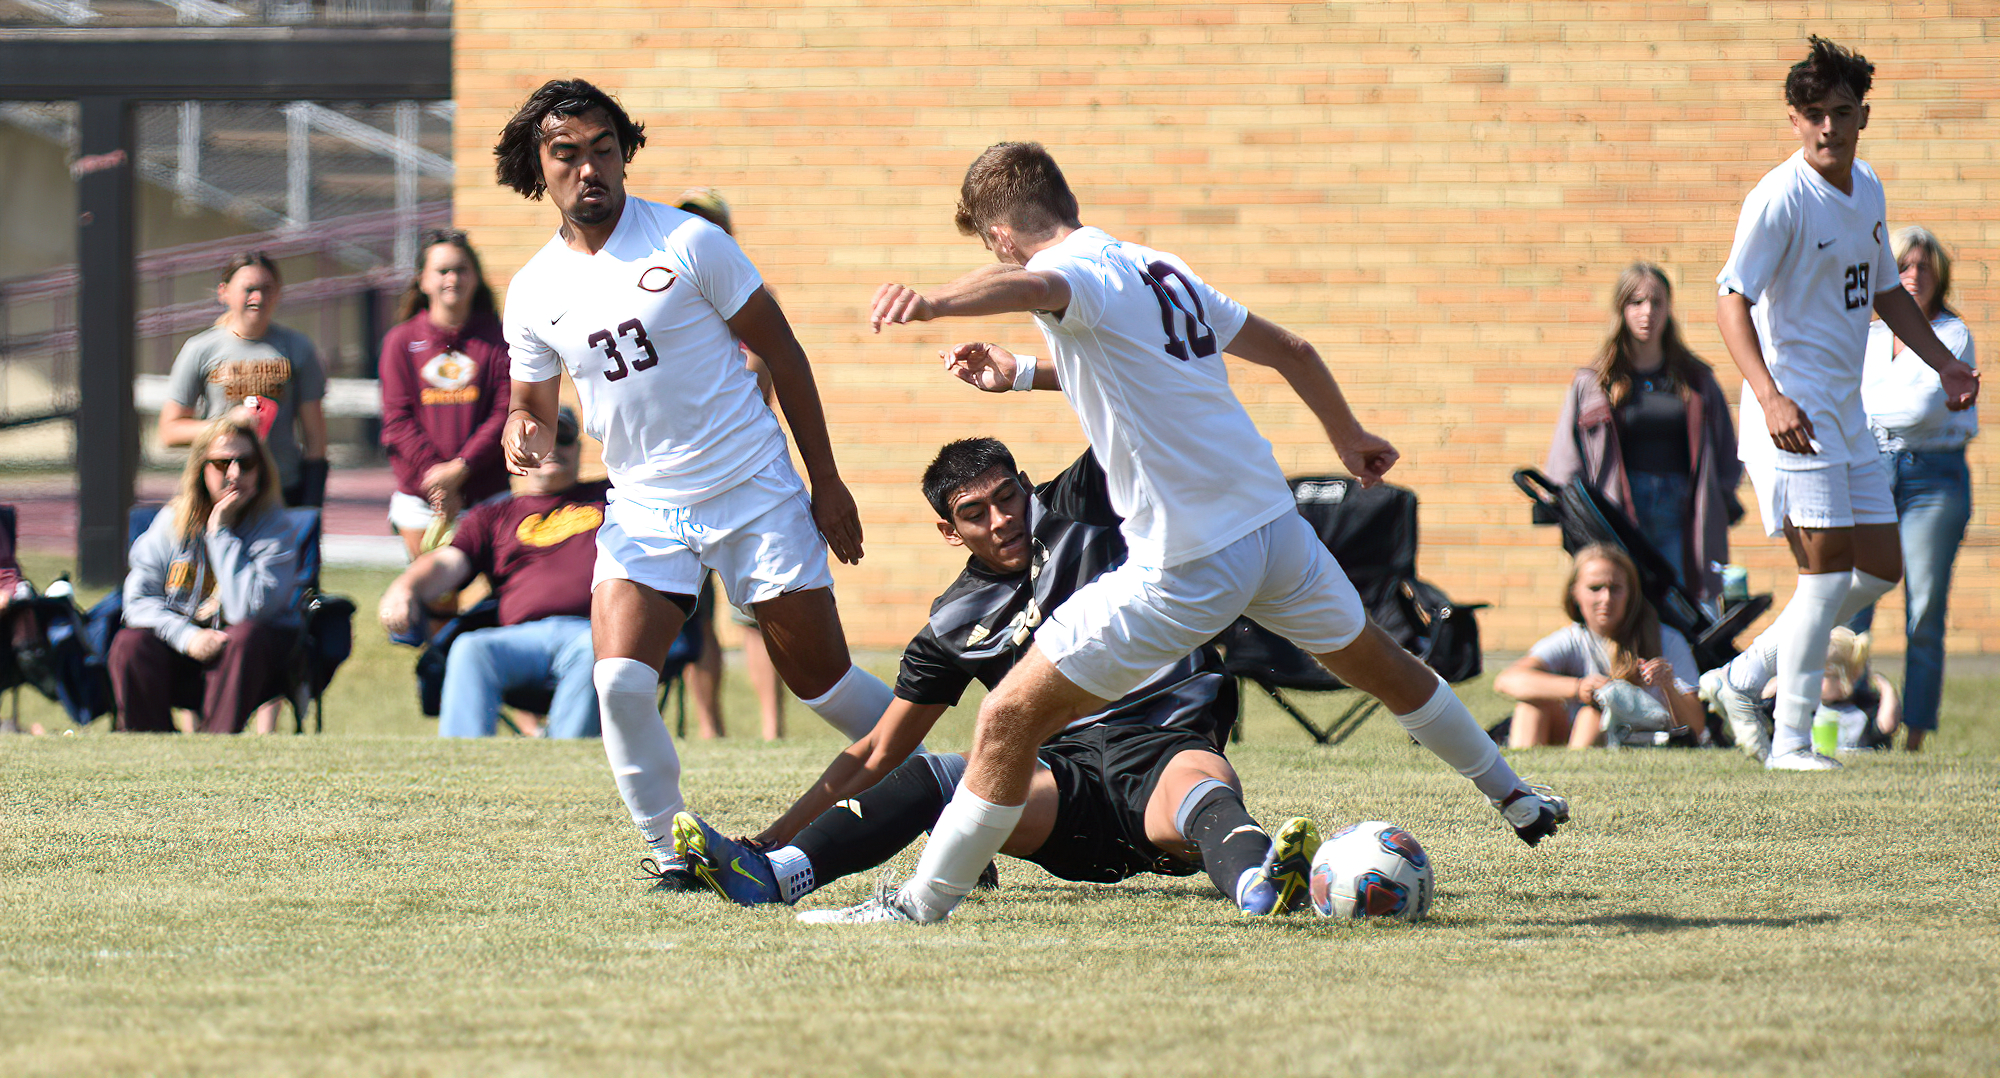 Kai Black (#33 - left) and Owen Gallo (far right) scored the Cobbers' two goals in their 2-1 win at St. Scholastica in the MIAC opener.